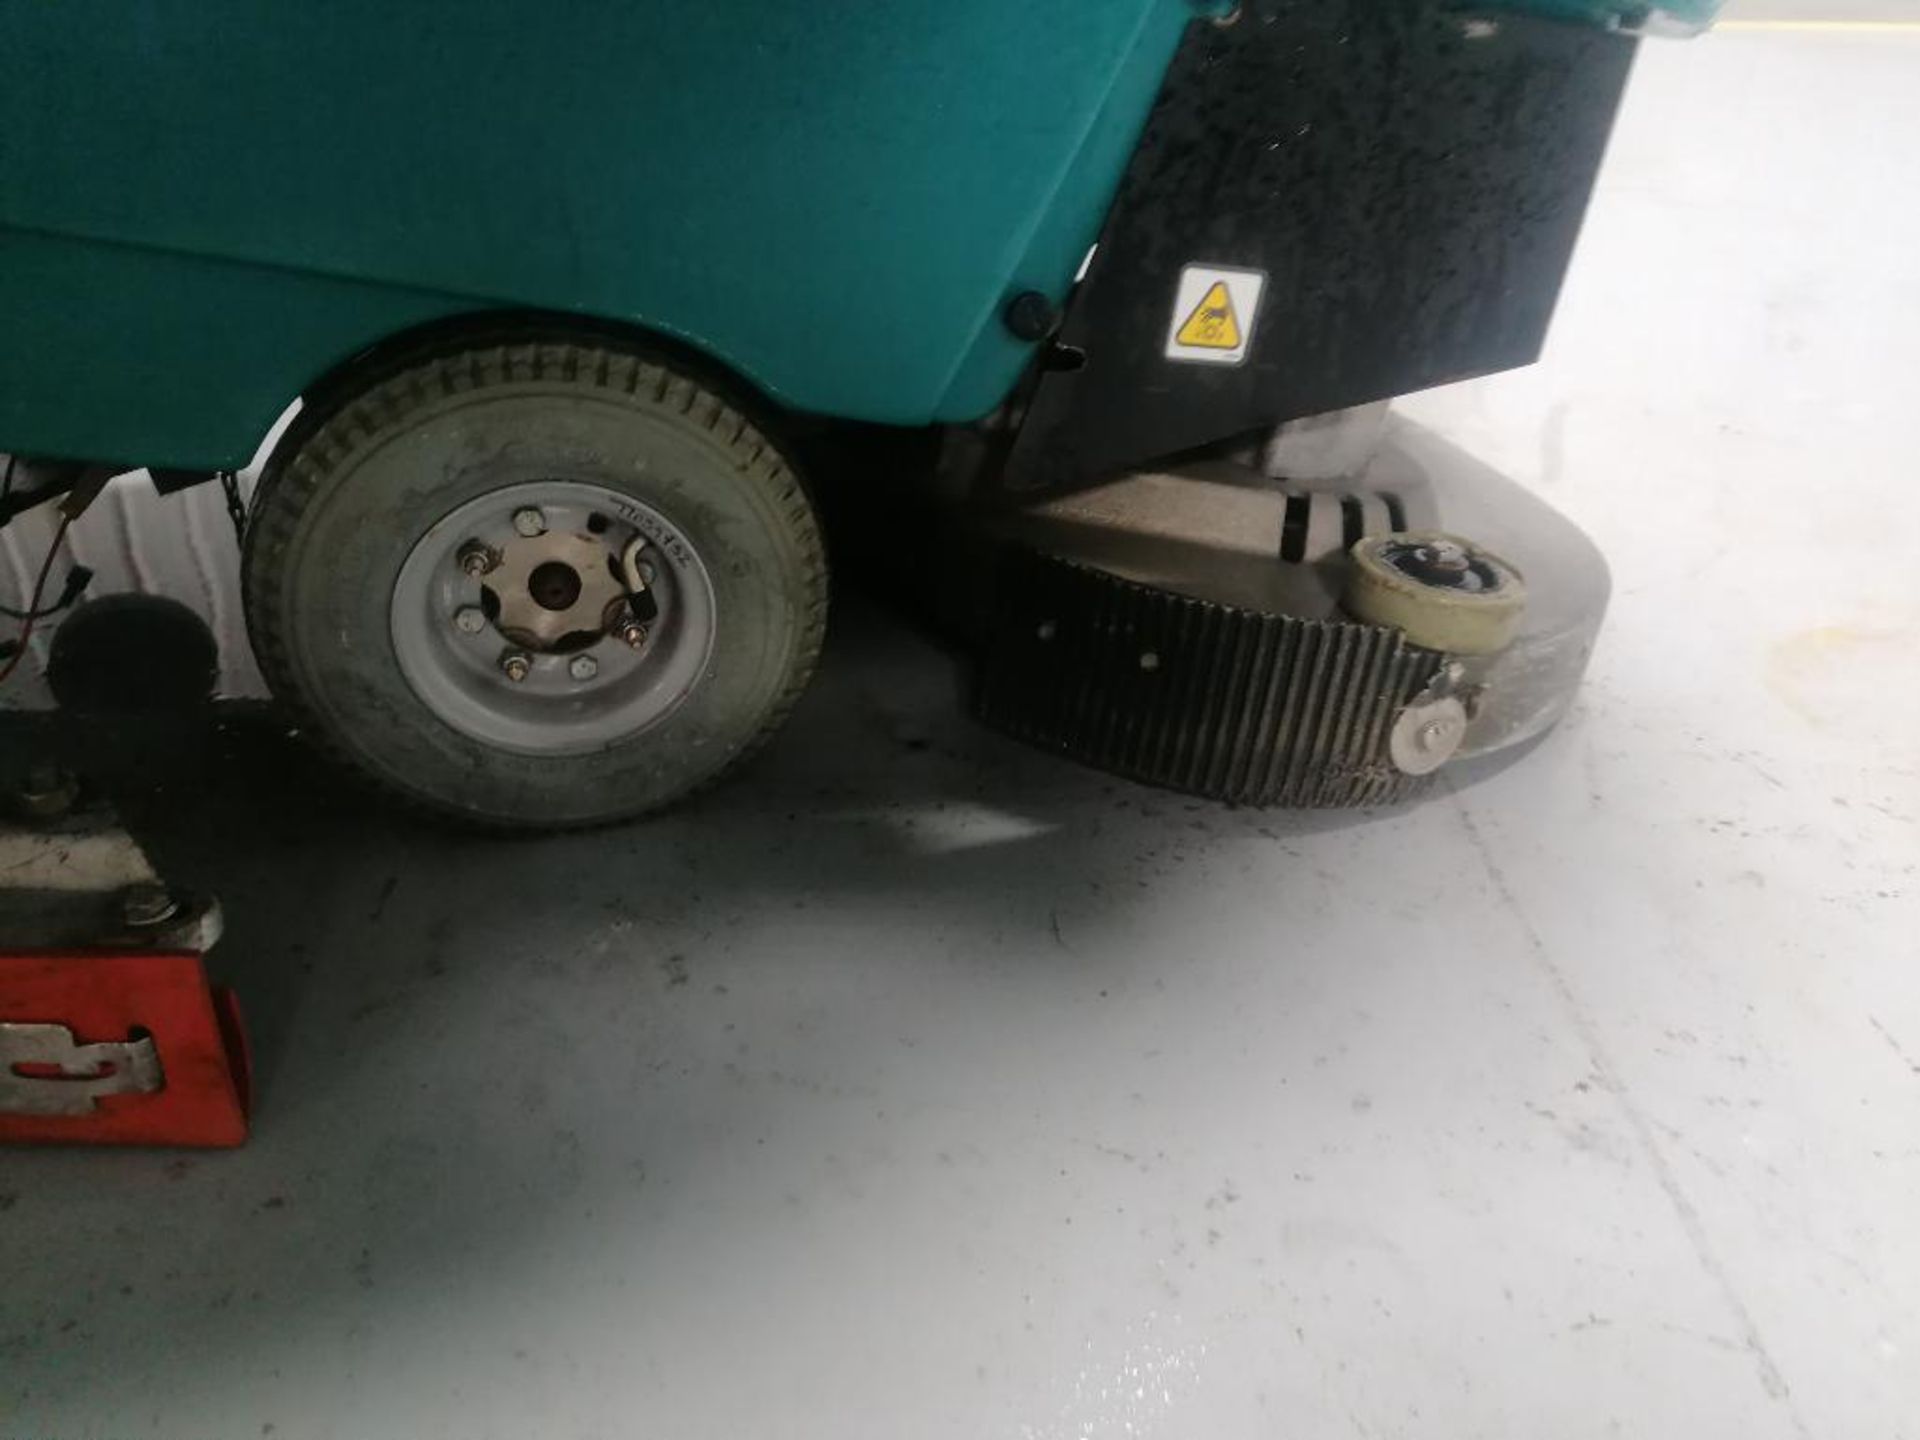 Tennant 5400 Floor Scrubber, Serial #540010203098, 24 Volts. Located in Mt. Pleasant, IA. - Image 16 of 17